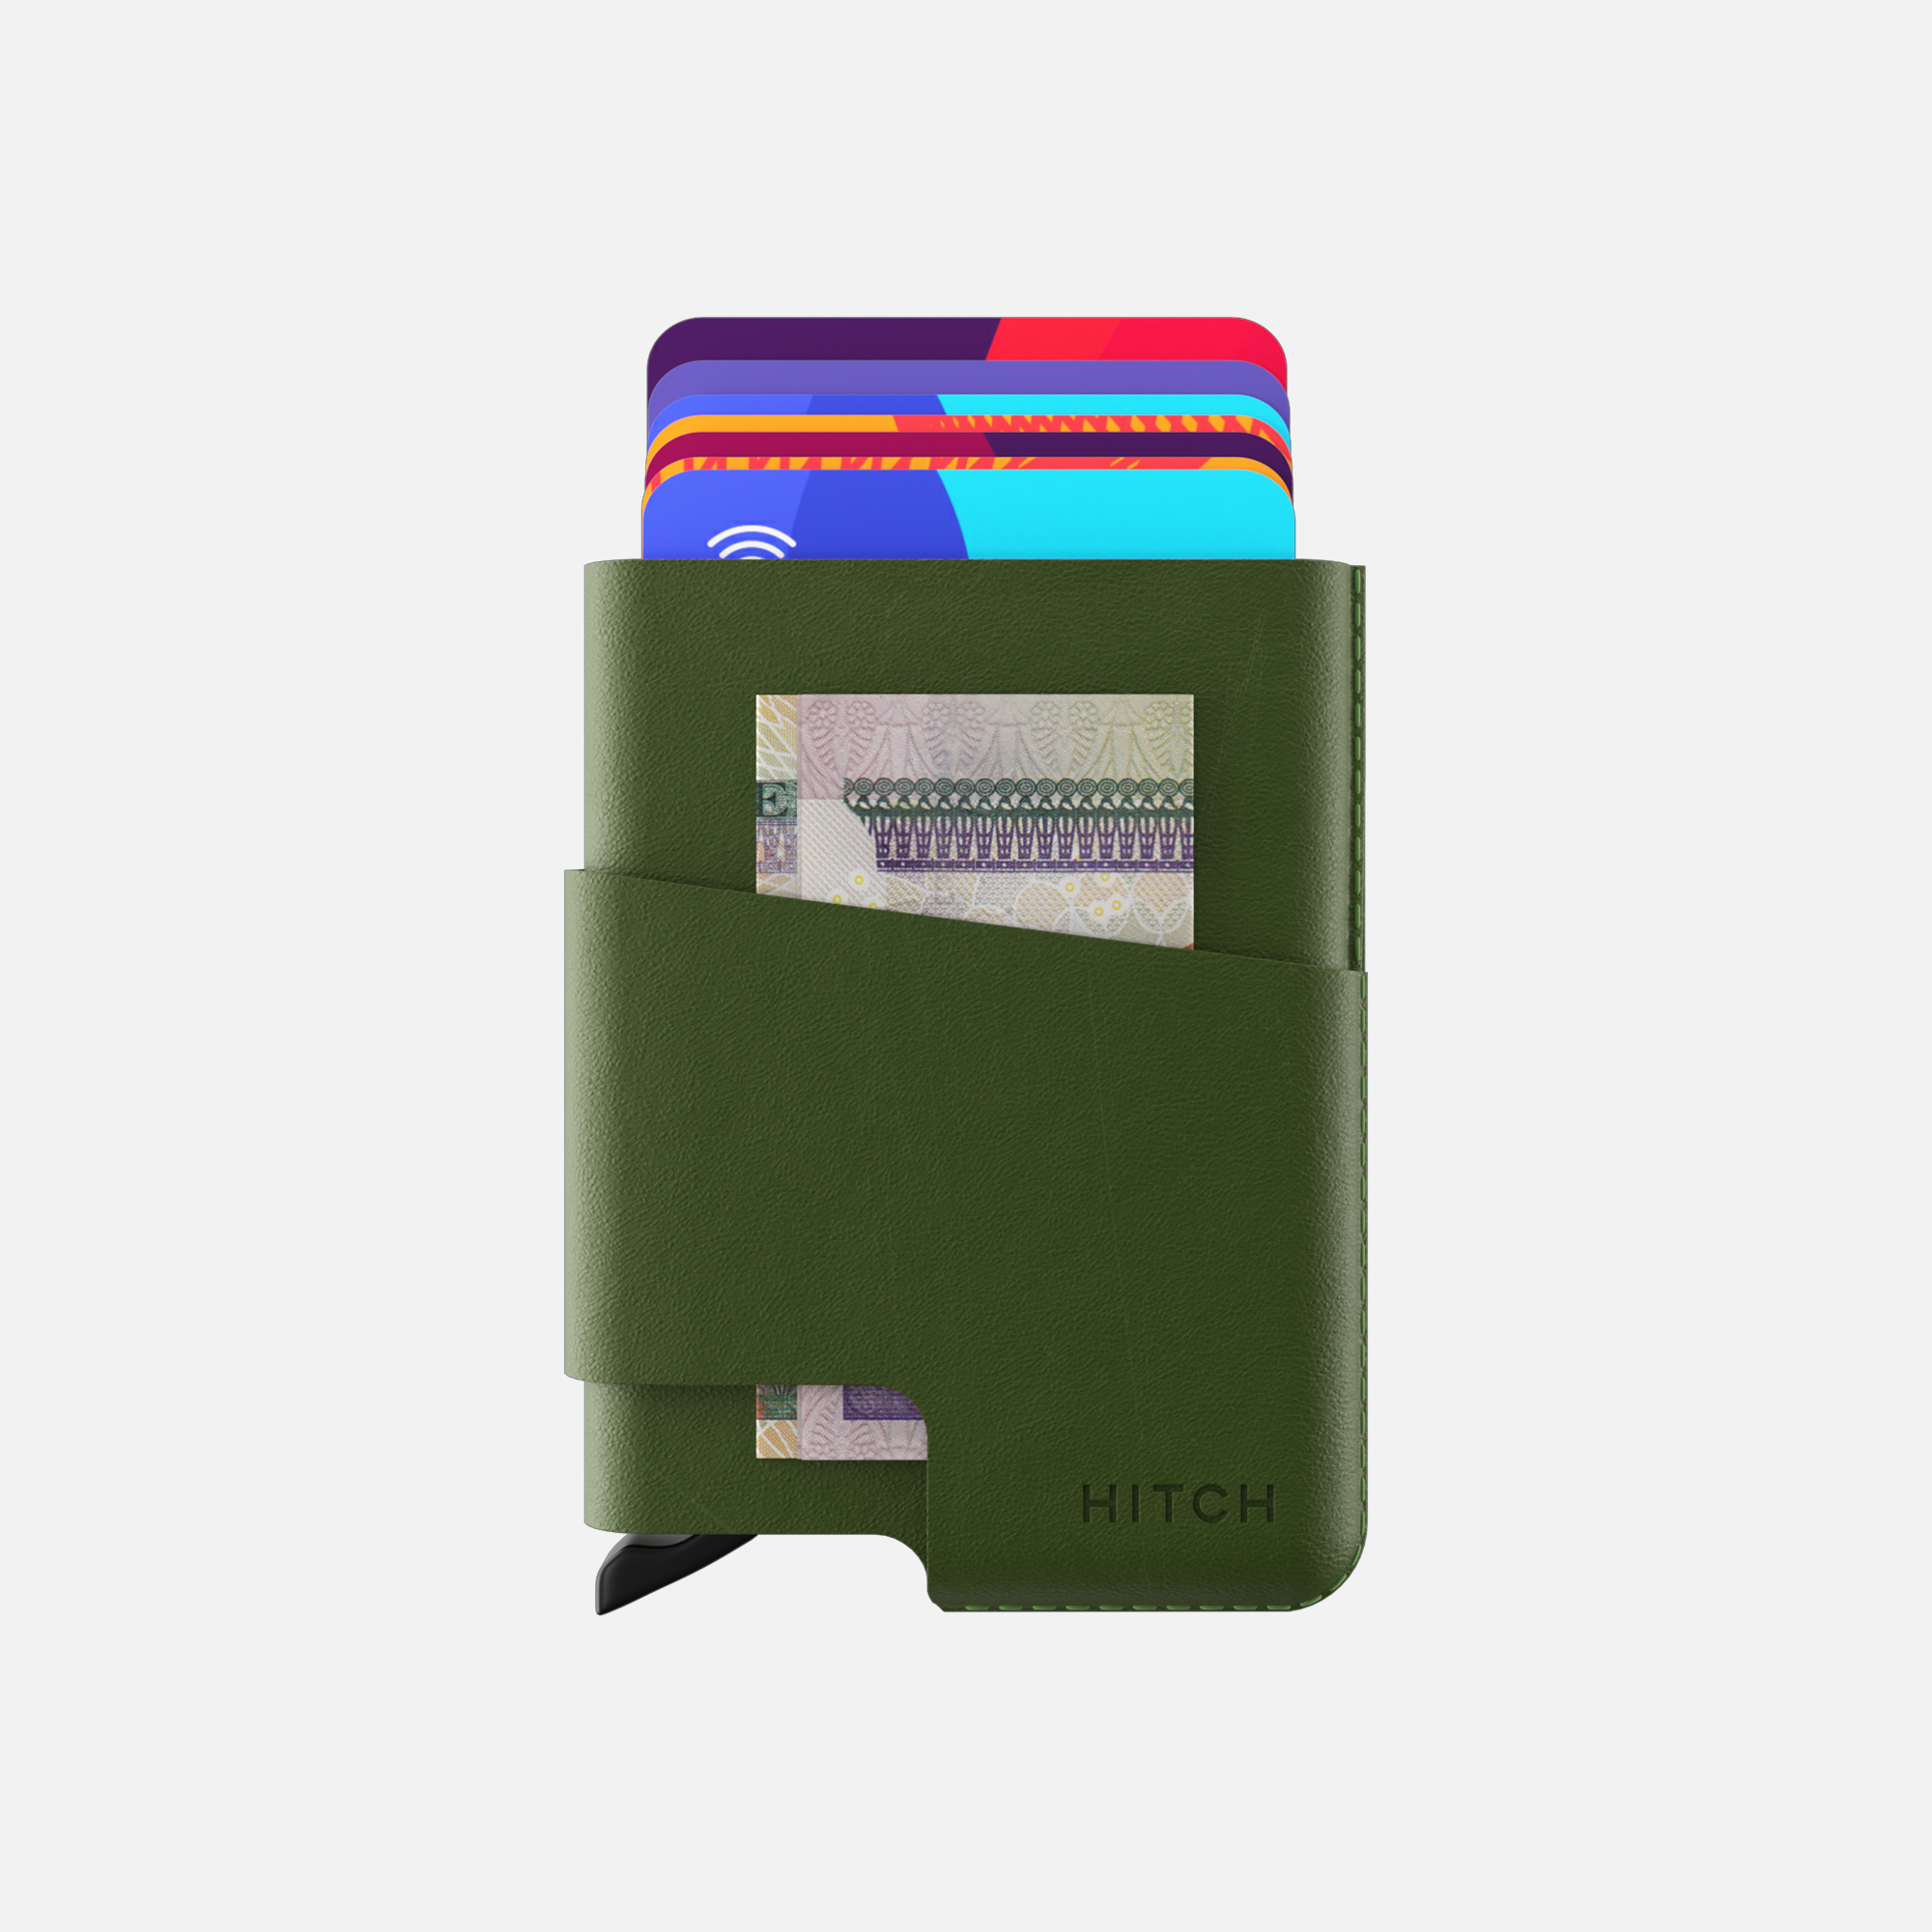 Green leather cardholder wallet with colorful credit cards and cash visible on white background.